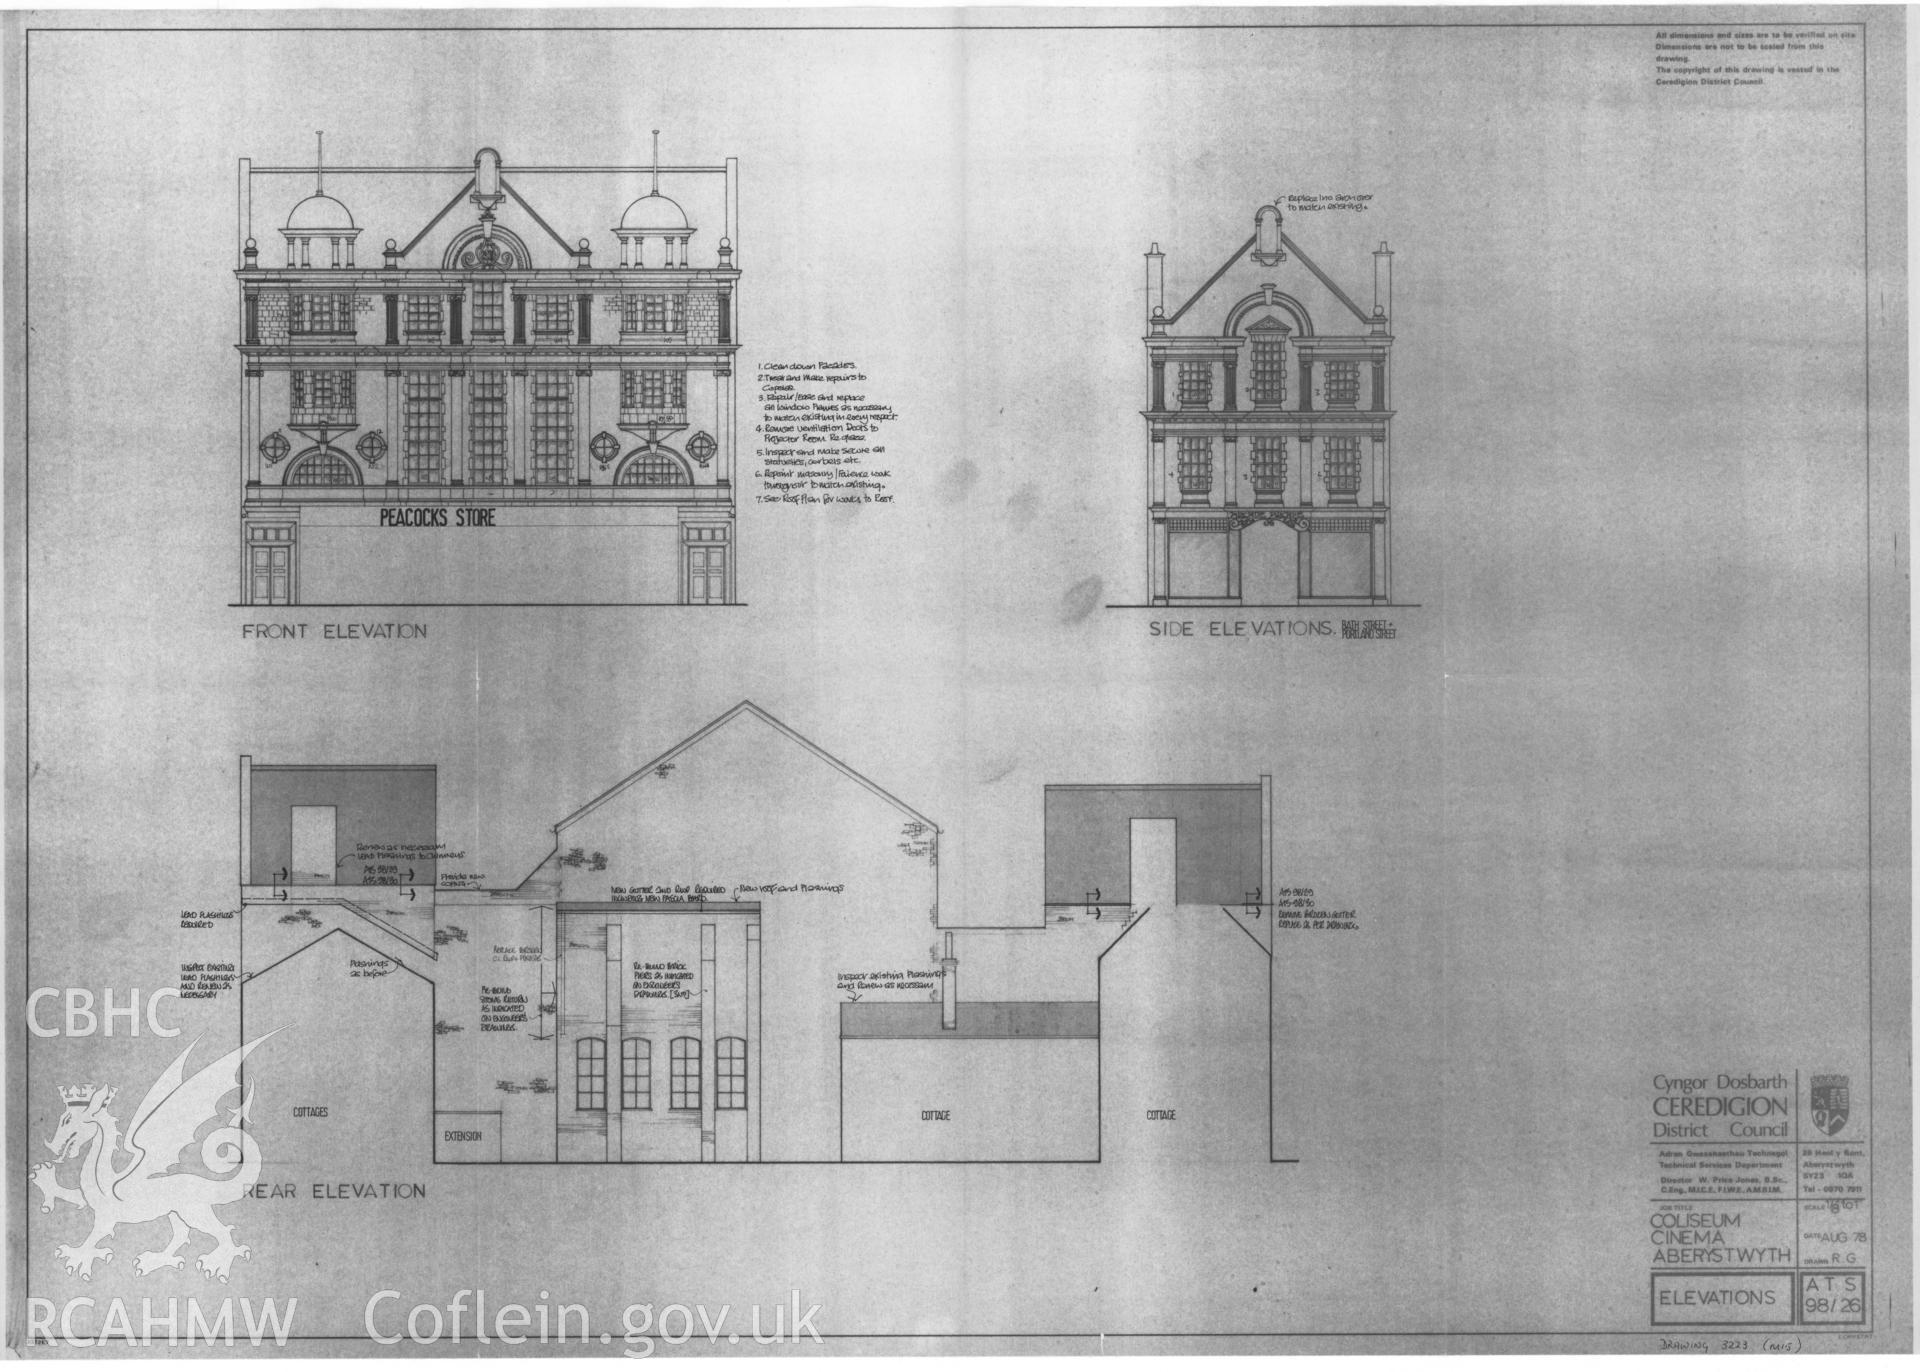 Copy of a non RCAHMW drawing showing elevations of Coliseum Cinema, Aberystwyth, received in the course of threatened buildings case ref no M/DES/B/CD/79/01